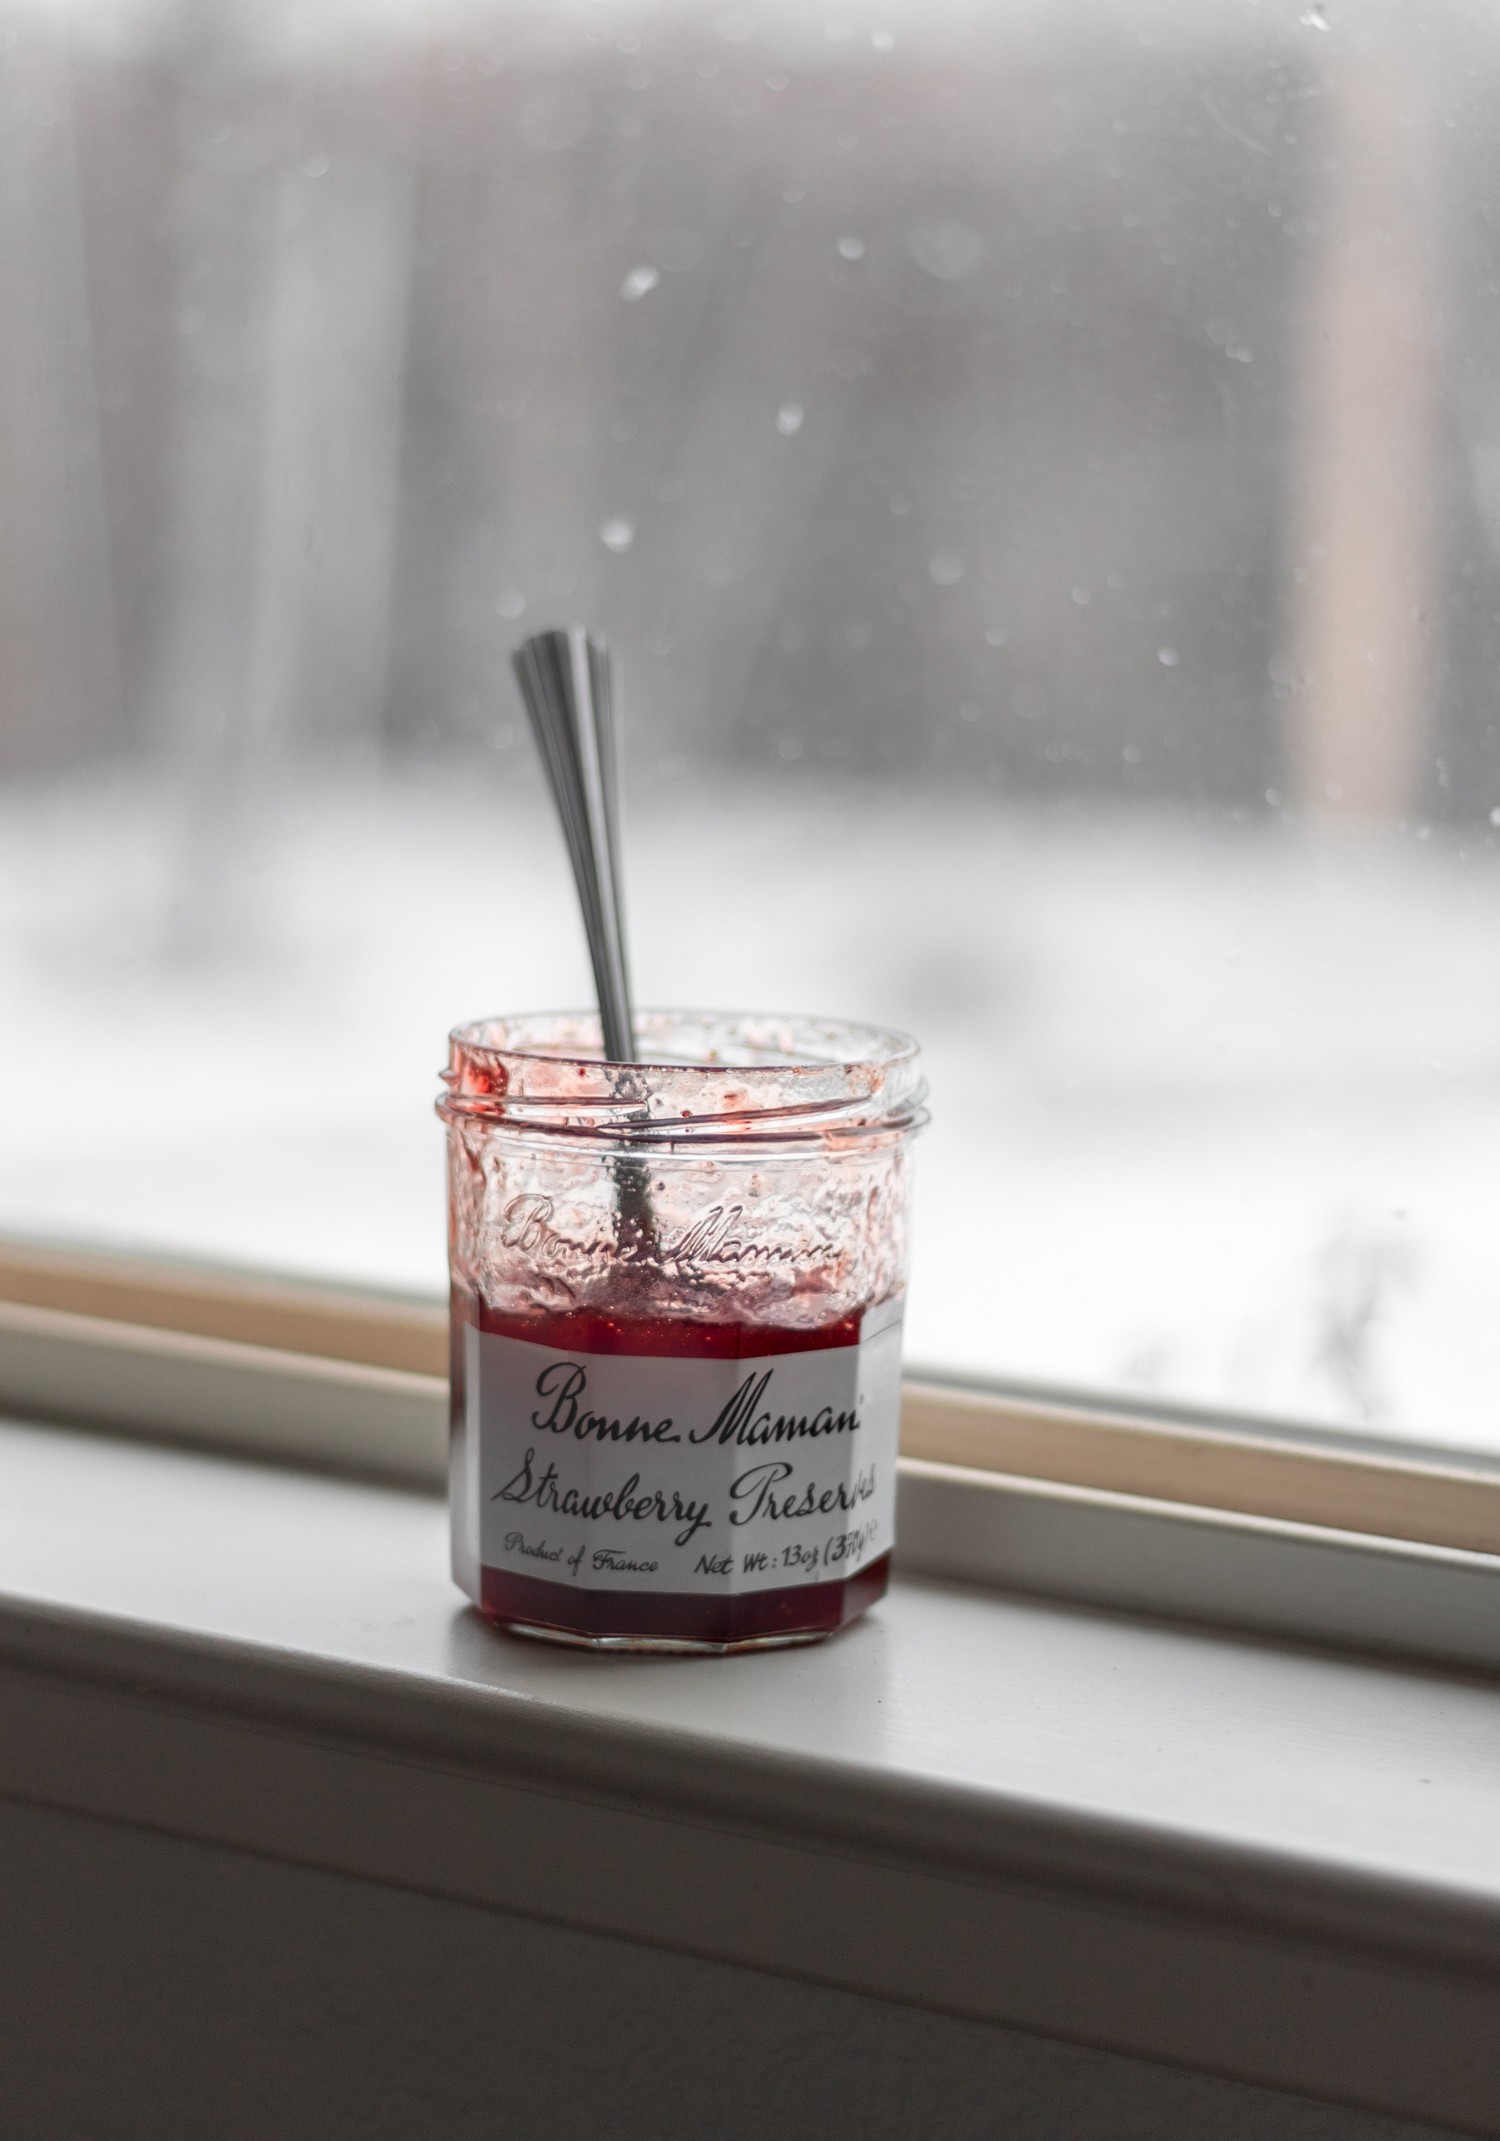 A jar of Bonne Maman preserves on a window sill with a snowy scene in the background.